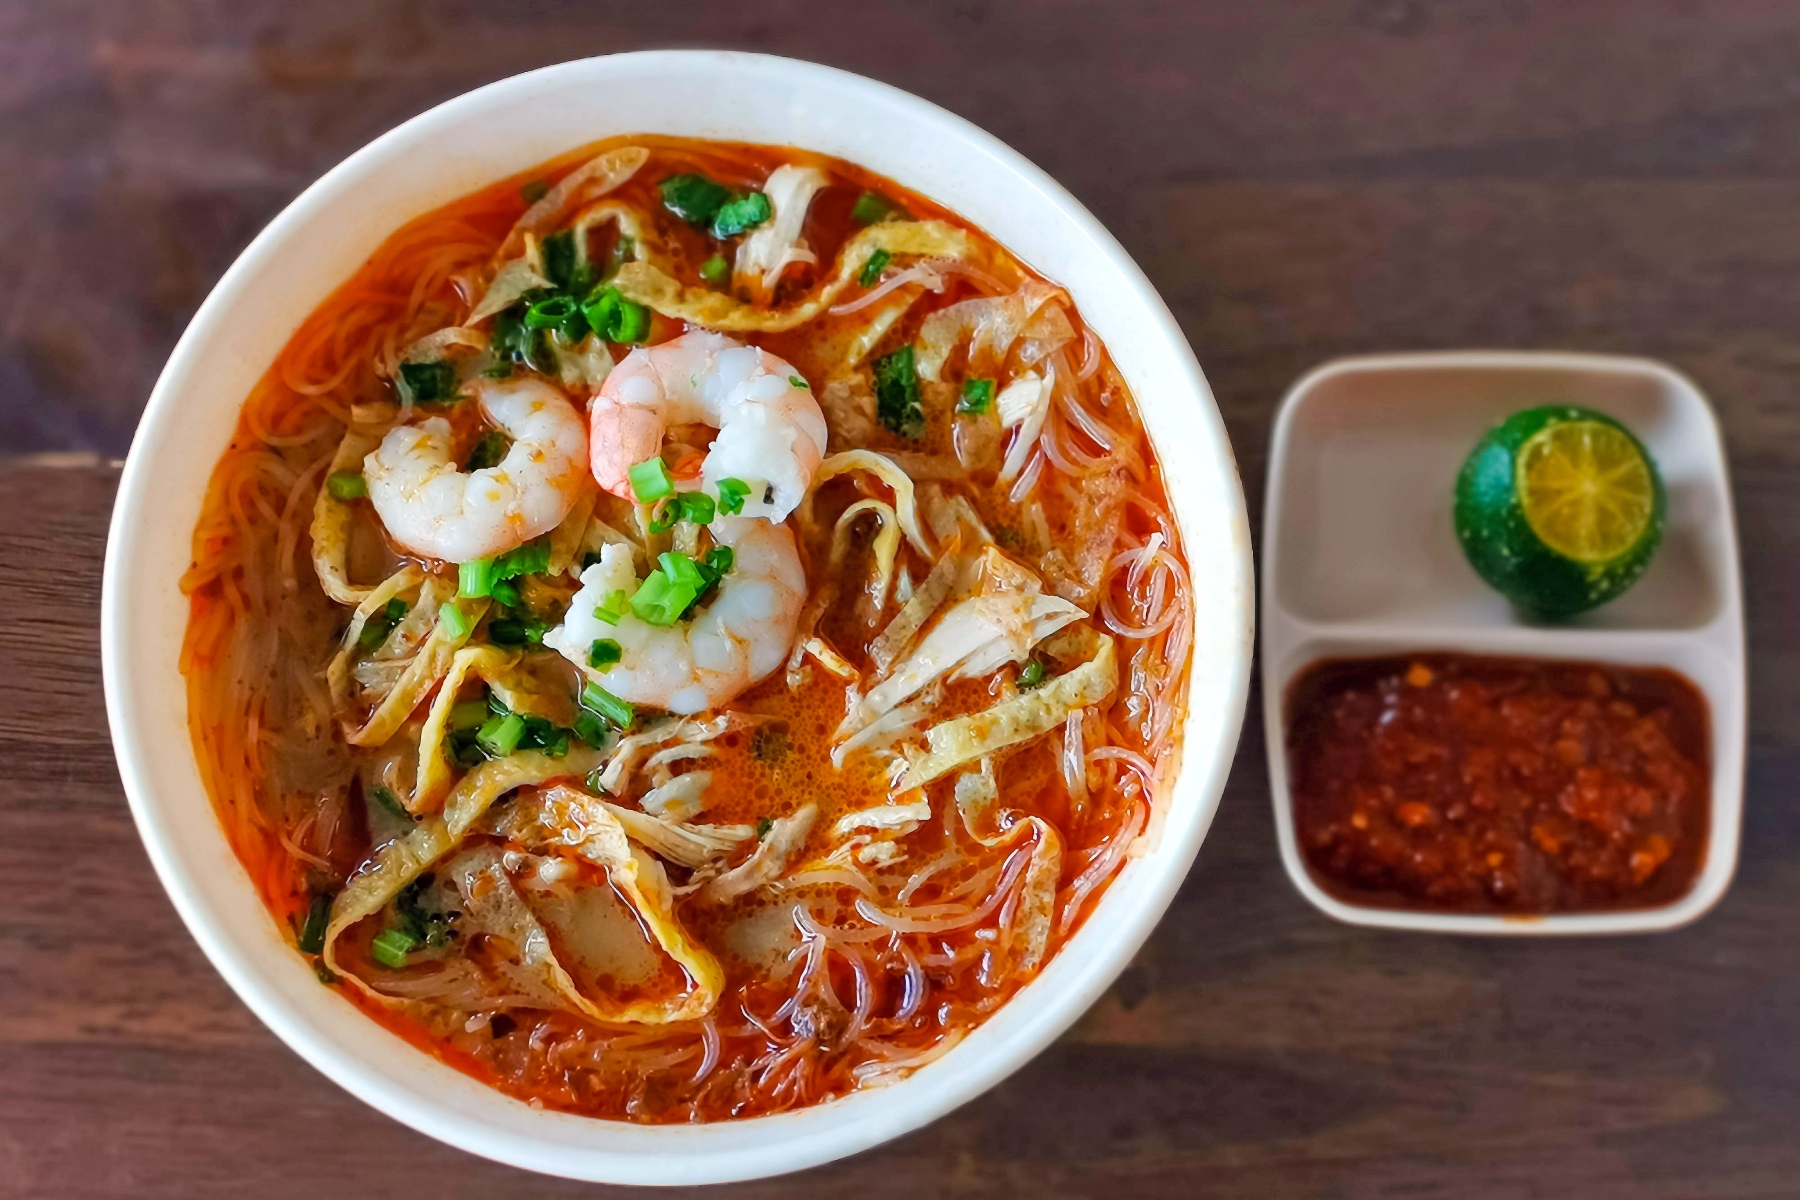 Laksa with noodles, prawns, and chicken in a spicy broth with a side of lime and sambal